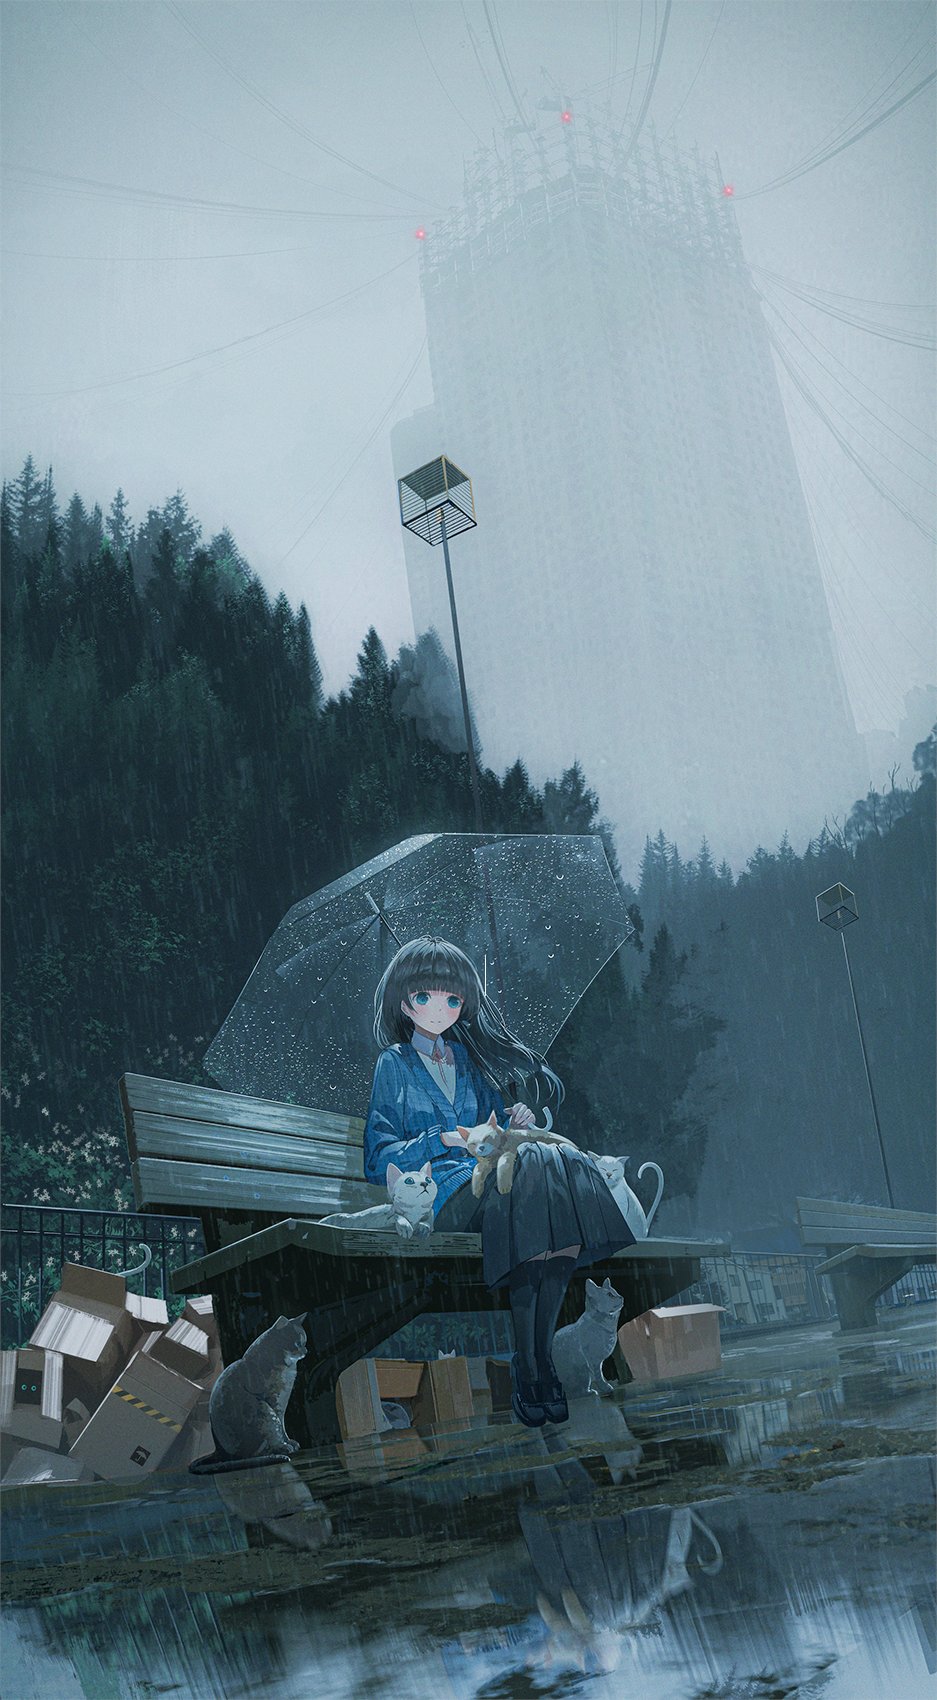 Anime 937x1700 Chocoshi looking at viewer portrait display on bench rain cats water reflection cardboard box women outdoors sitting animals legs together blue eyes skyscraper long hair street light puddle long sleeves trees bench sky